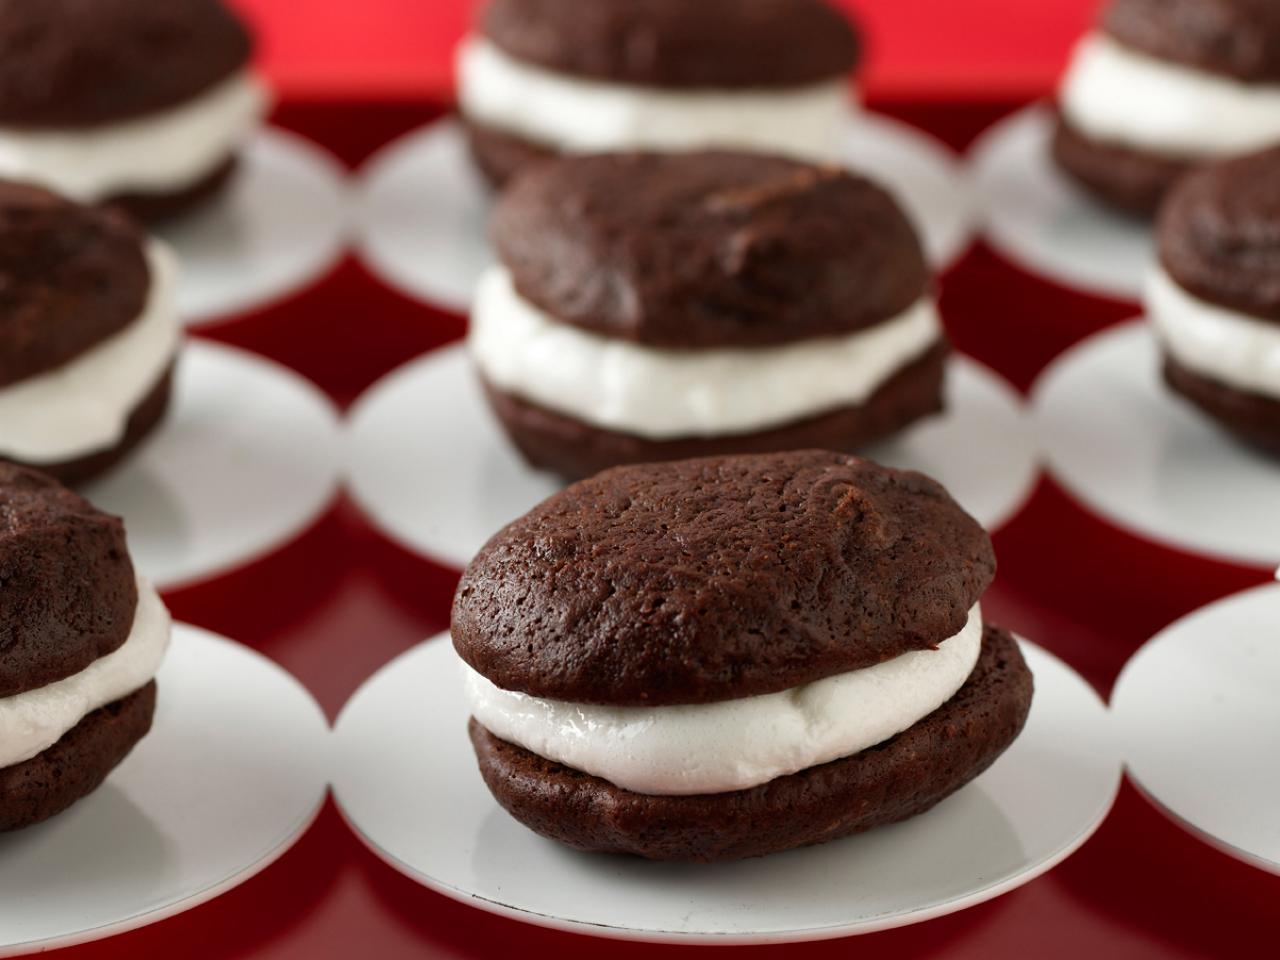 Healthy Recipes Using Specialty Baking Pans: Whoopie Pie, Donut & More